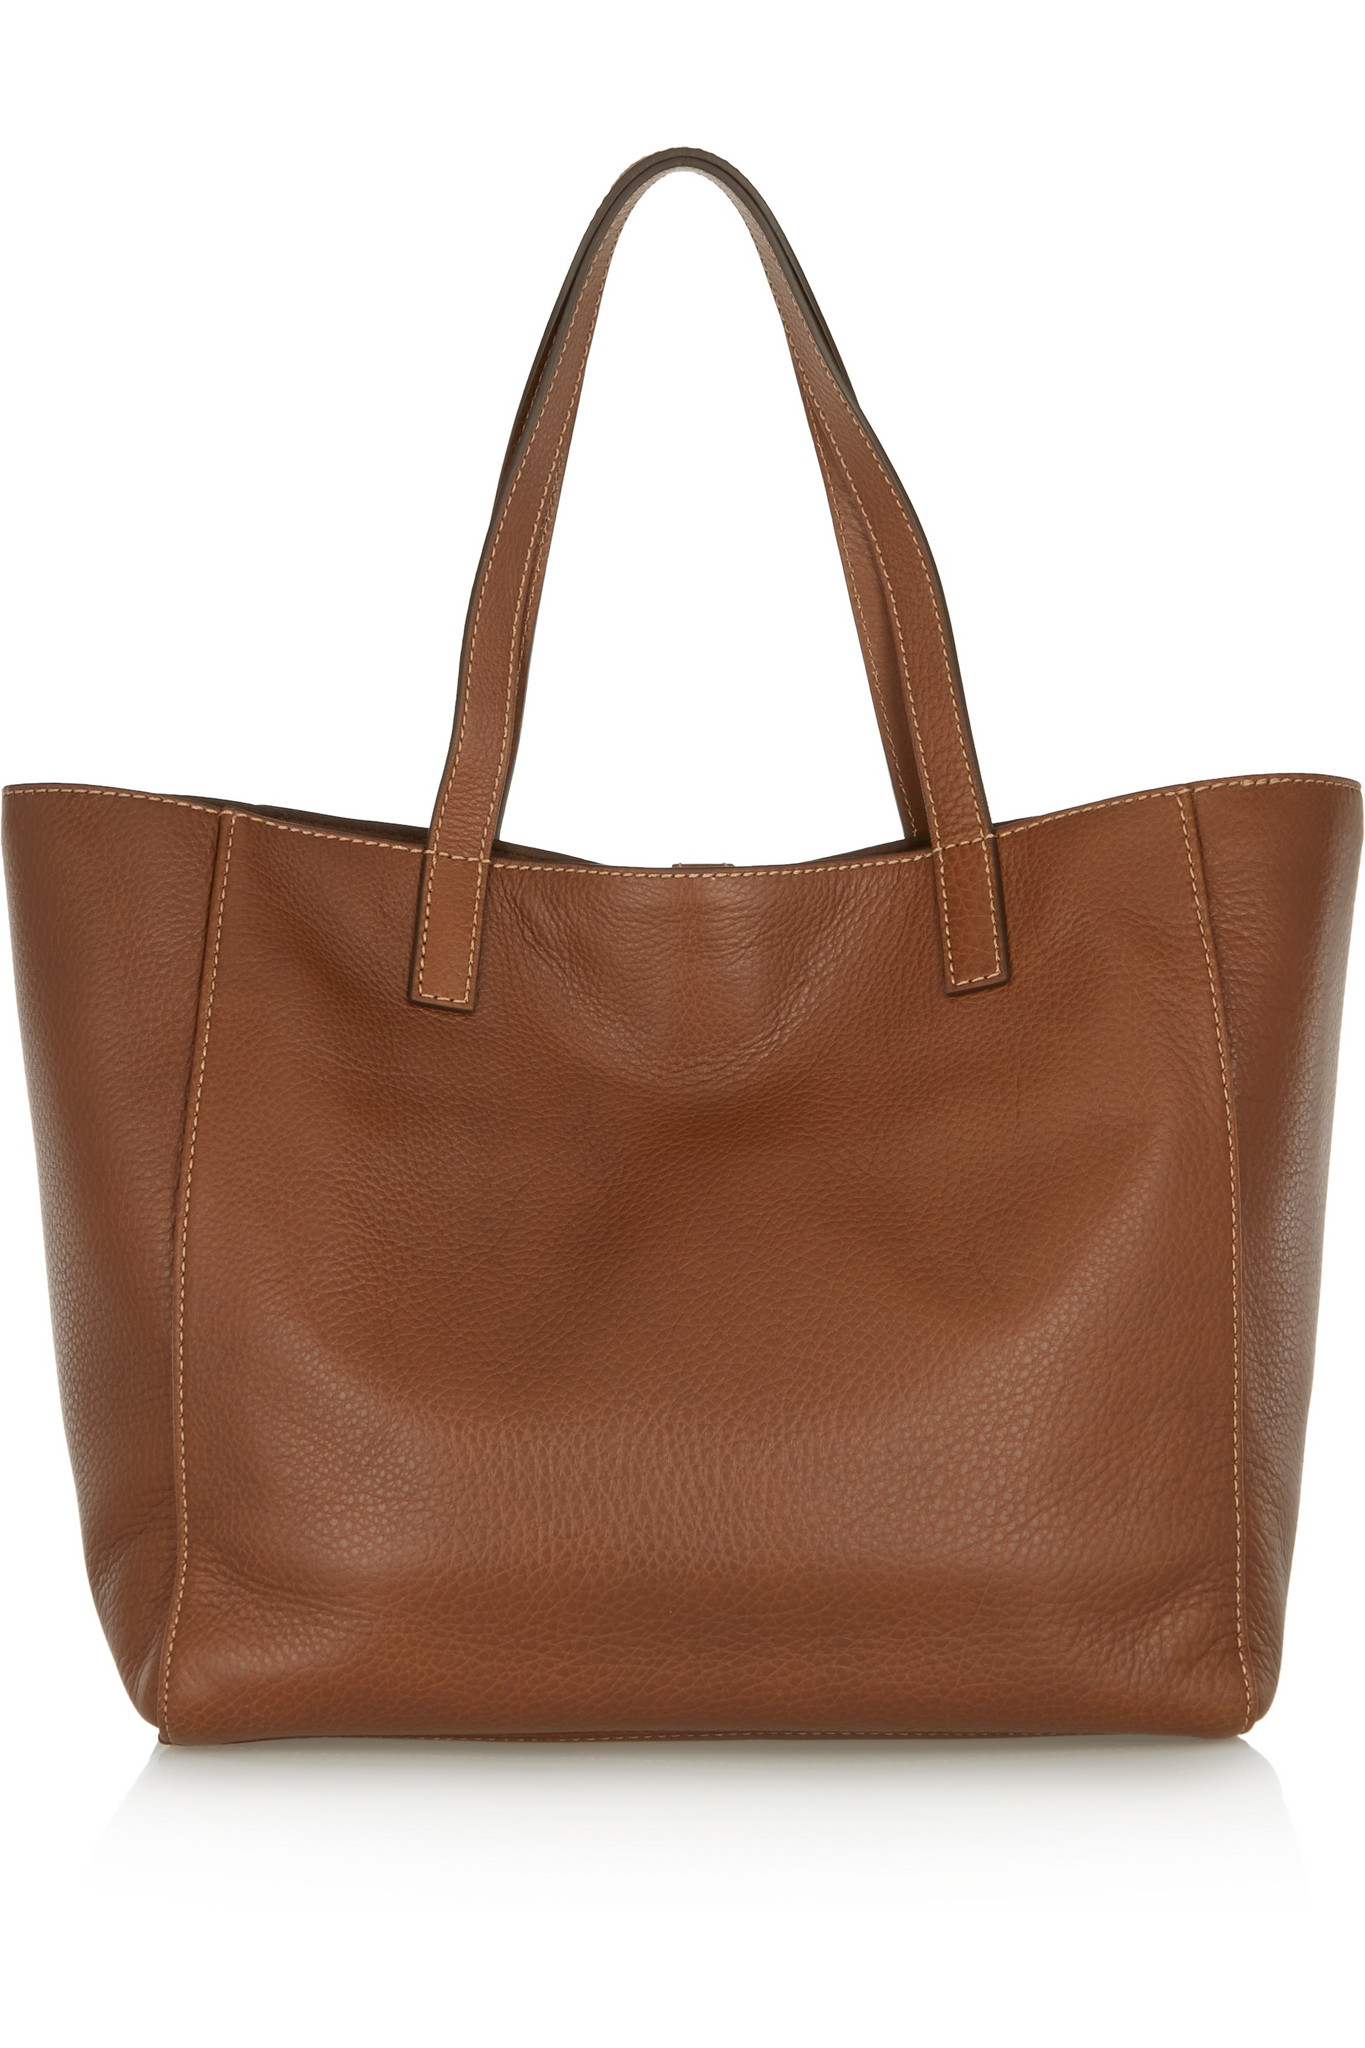 Mulberry Leather Tessie Tote Bag in Oak (Brown) - Lyst